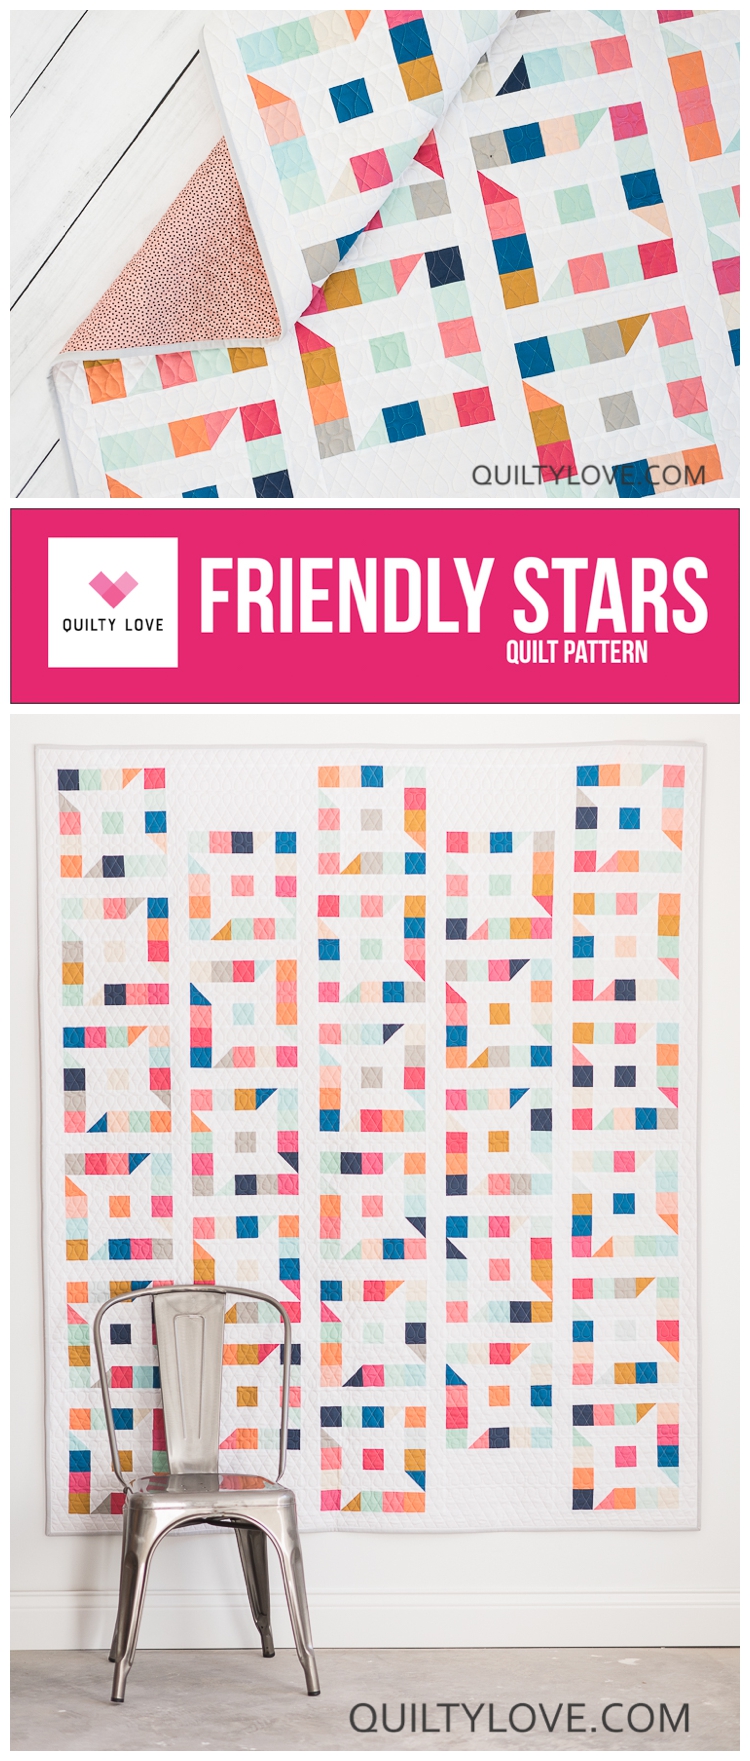 Friendly stars quilt pattern by Emily of quiltylove.com